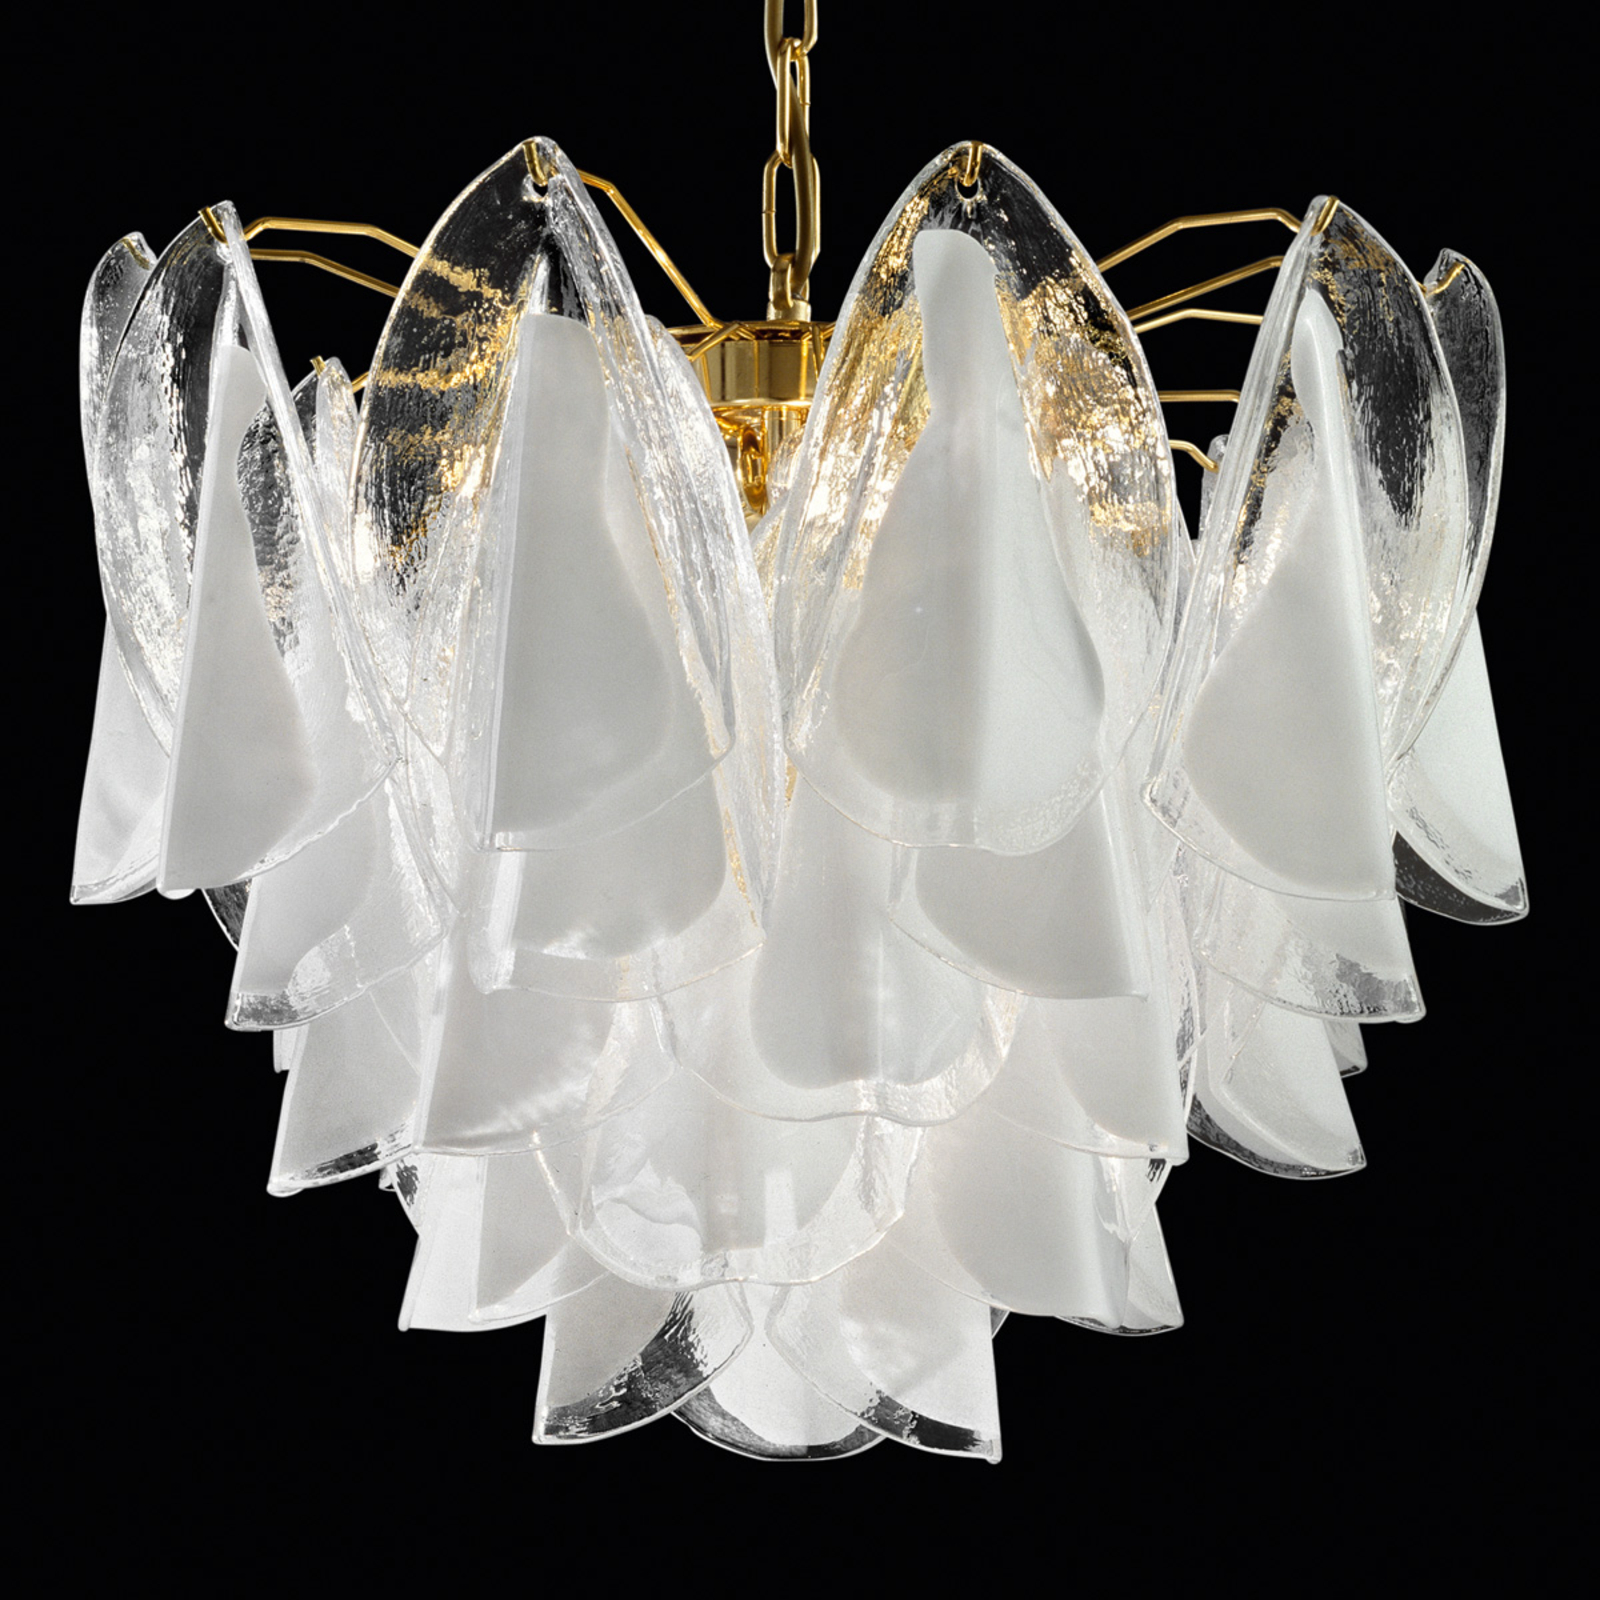 Glass hanging light Rondini with 24 carat gold